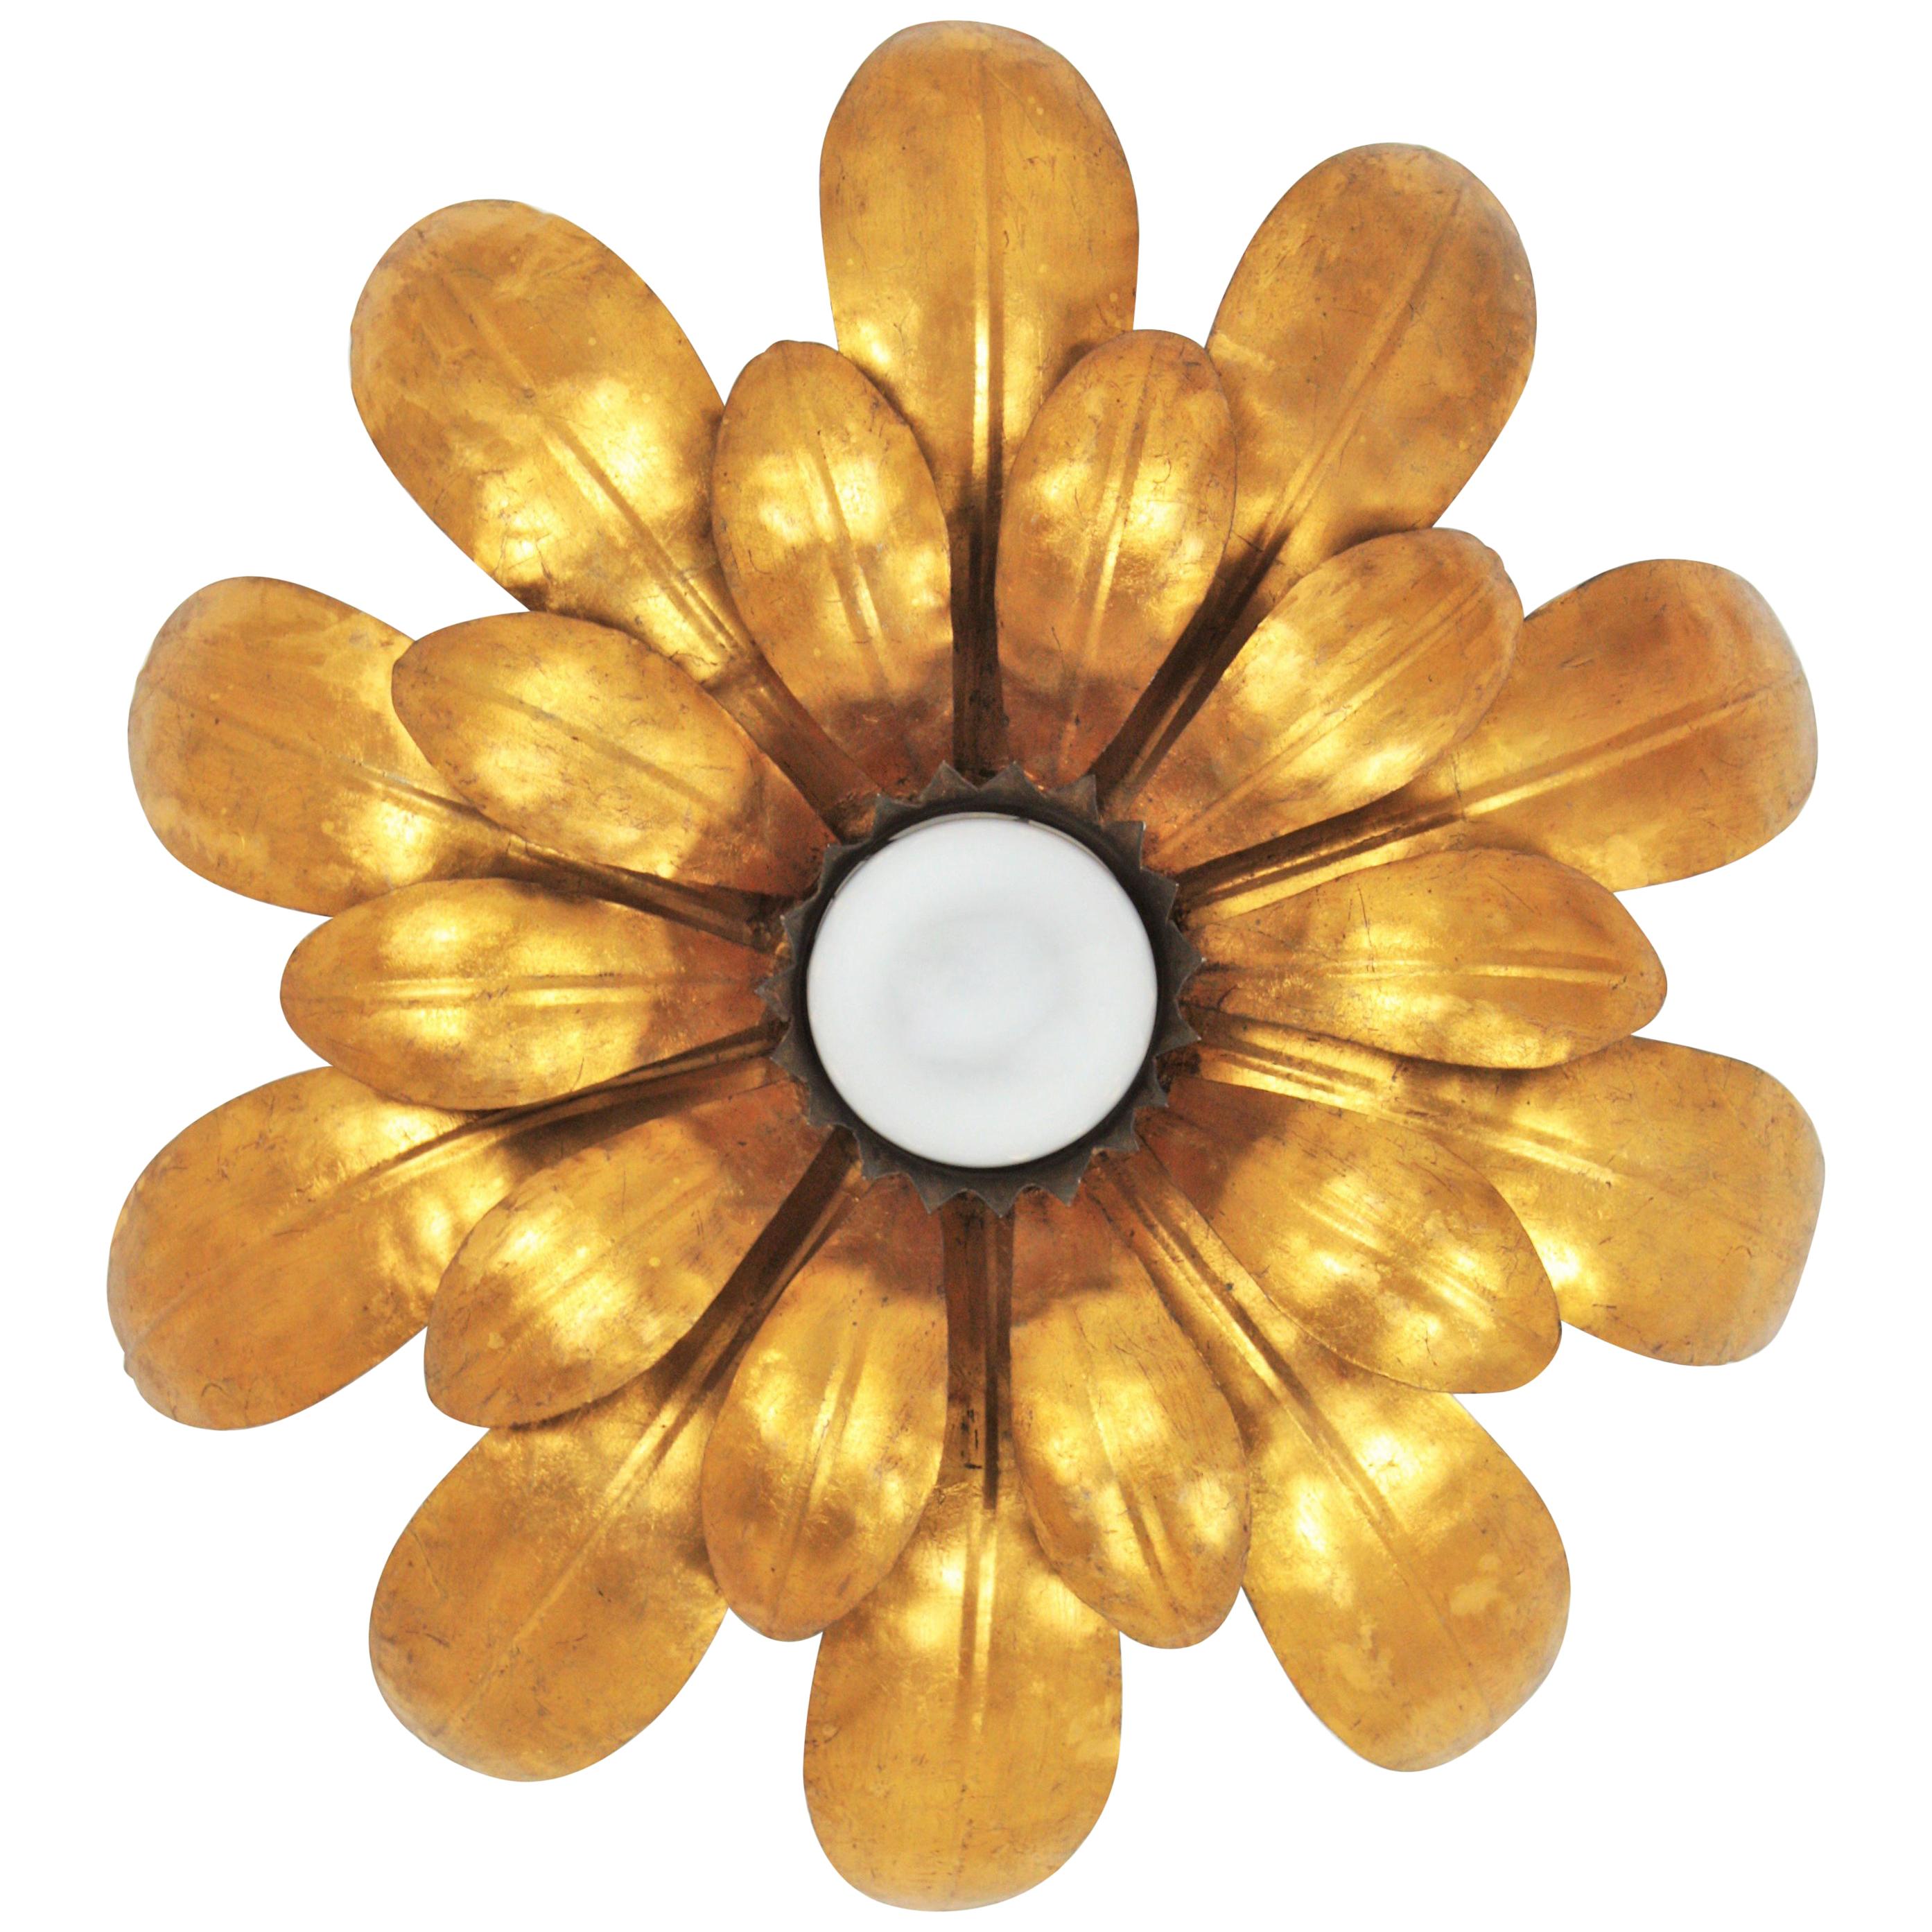 One of a kind Hollywood Regency double layered sunburst floral flushmount or light fixture, France, 1950
This sconce was finely executed, all made by hand and gilded with gold leaf.
It has a stylish design of leaves full of movement and a